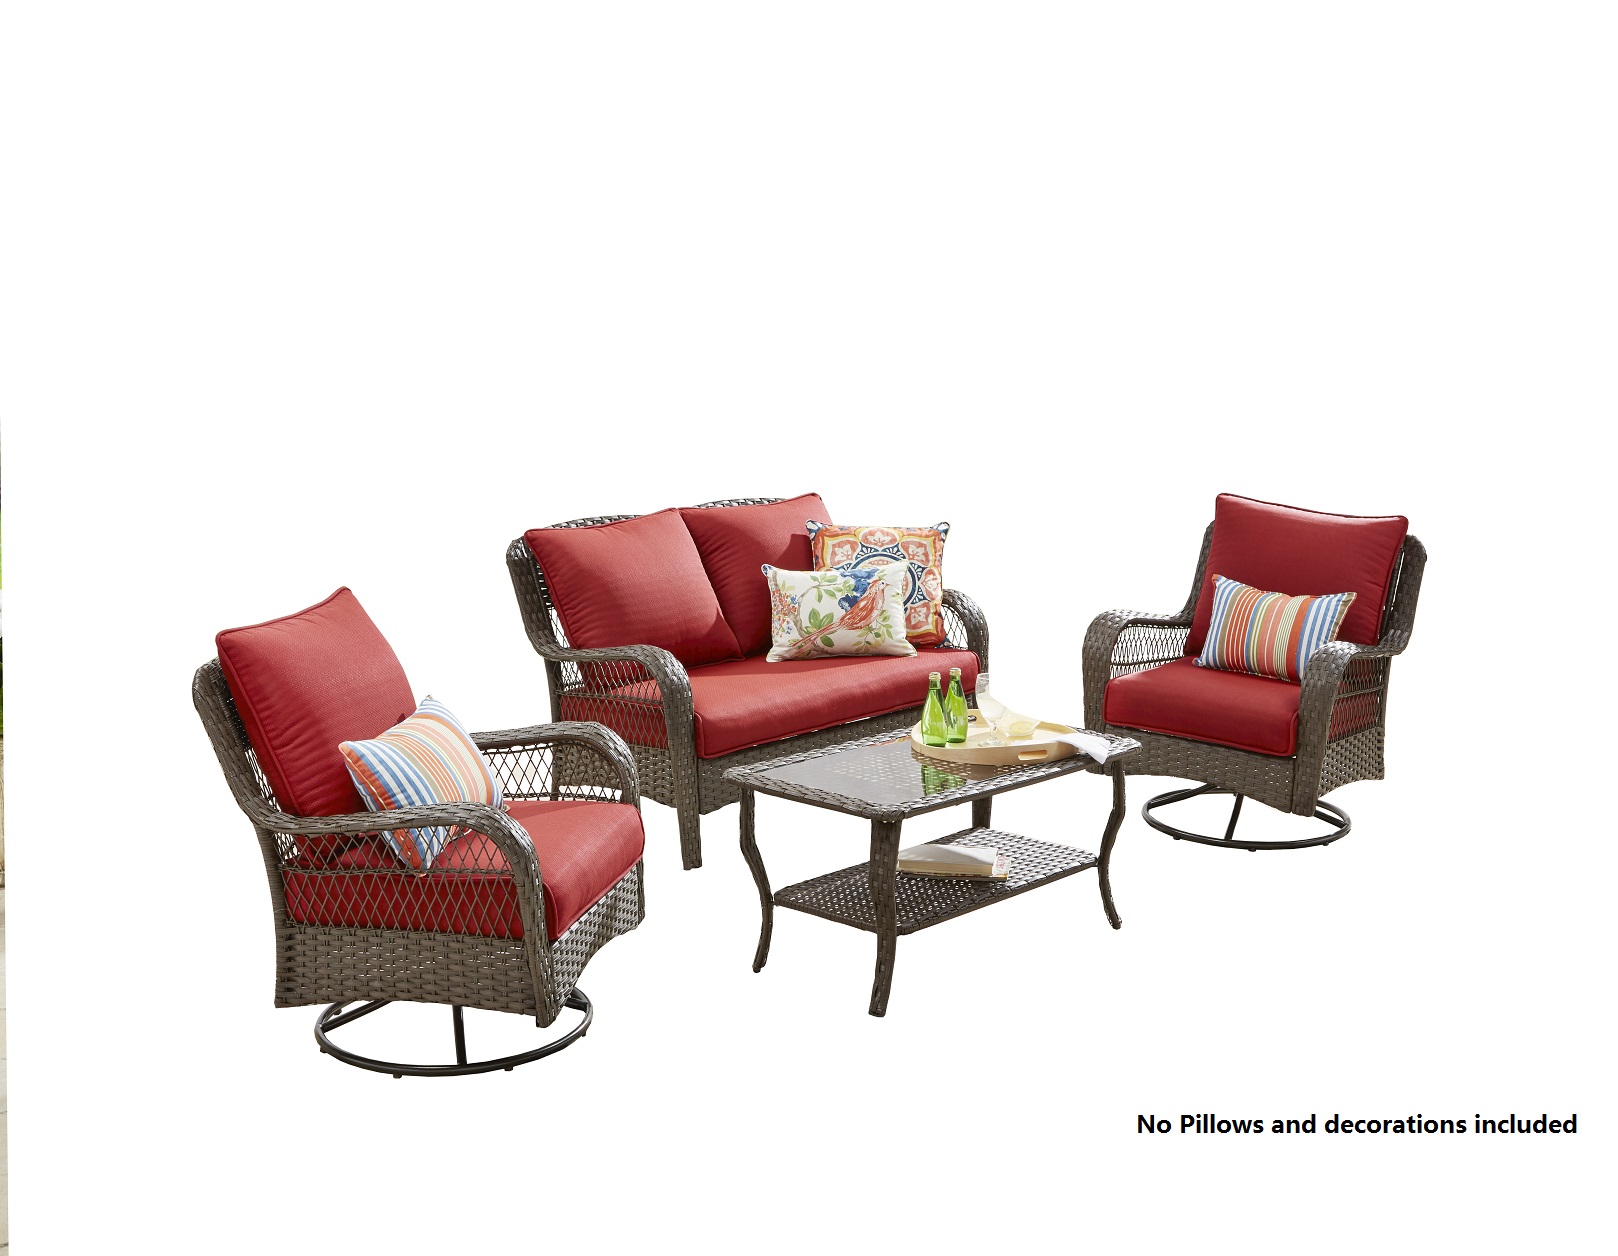 Better Homes & Gardens Colebrook 4-Piece Wicker Patio Furniture Conversation Set, with Swivel Chairs - image 1 of 10